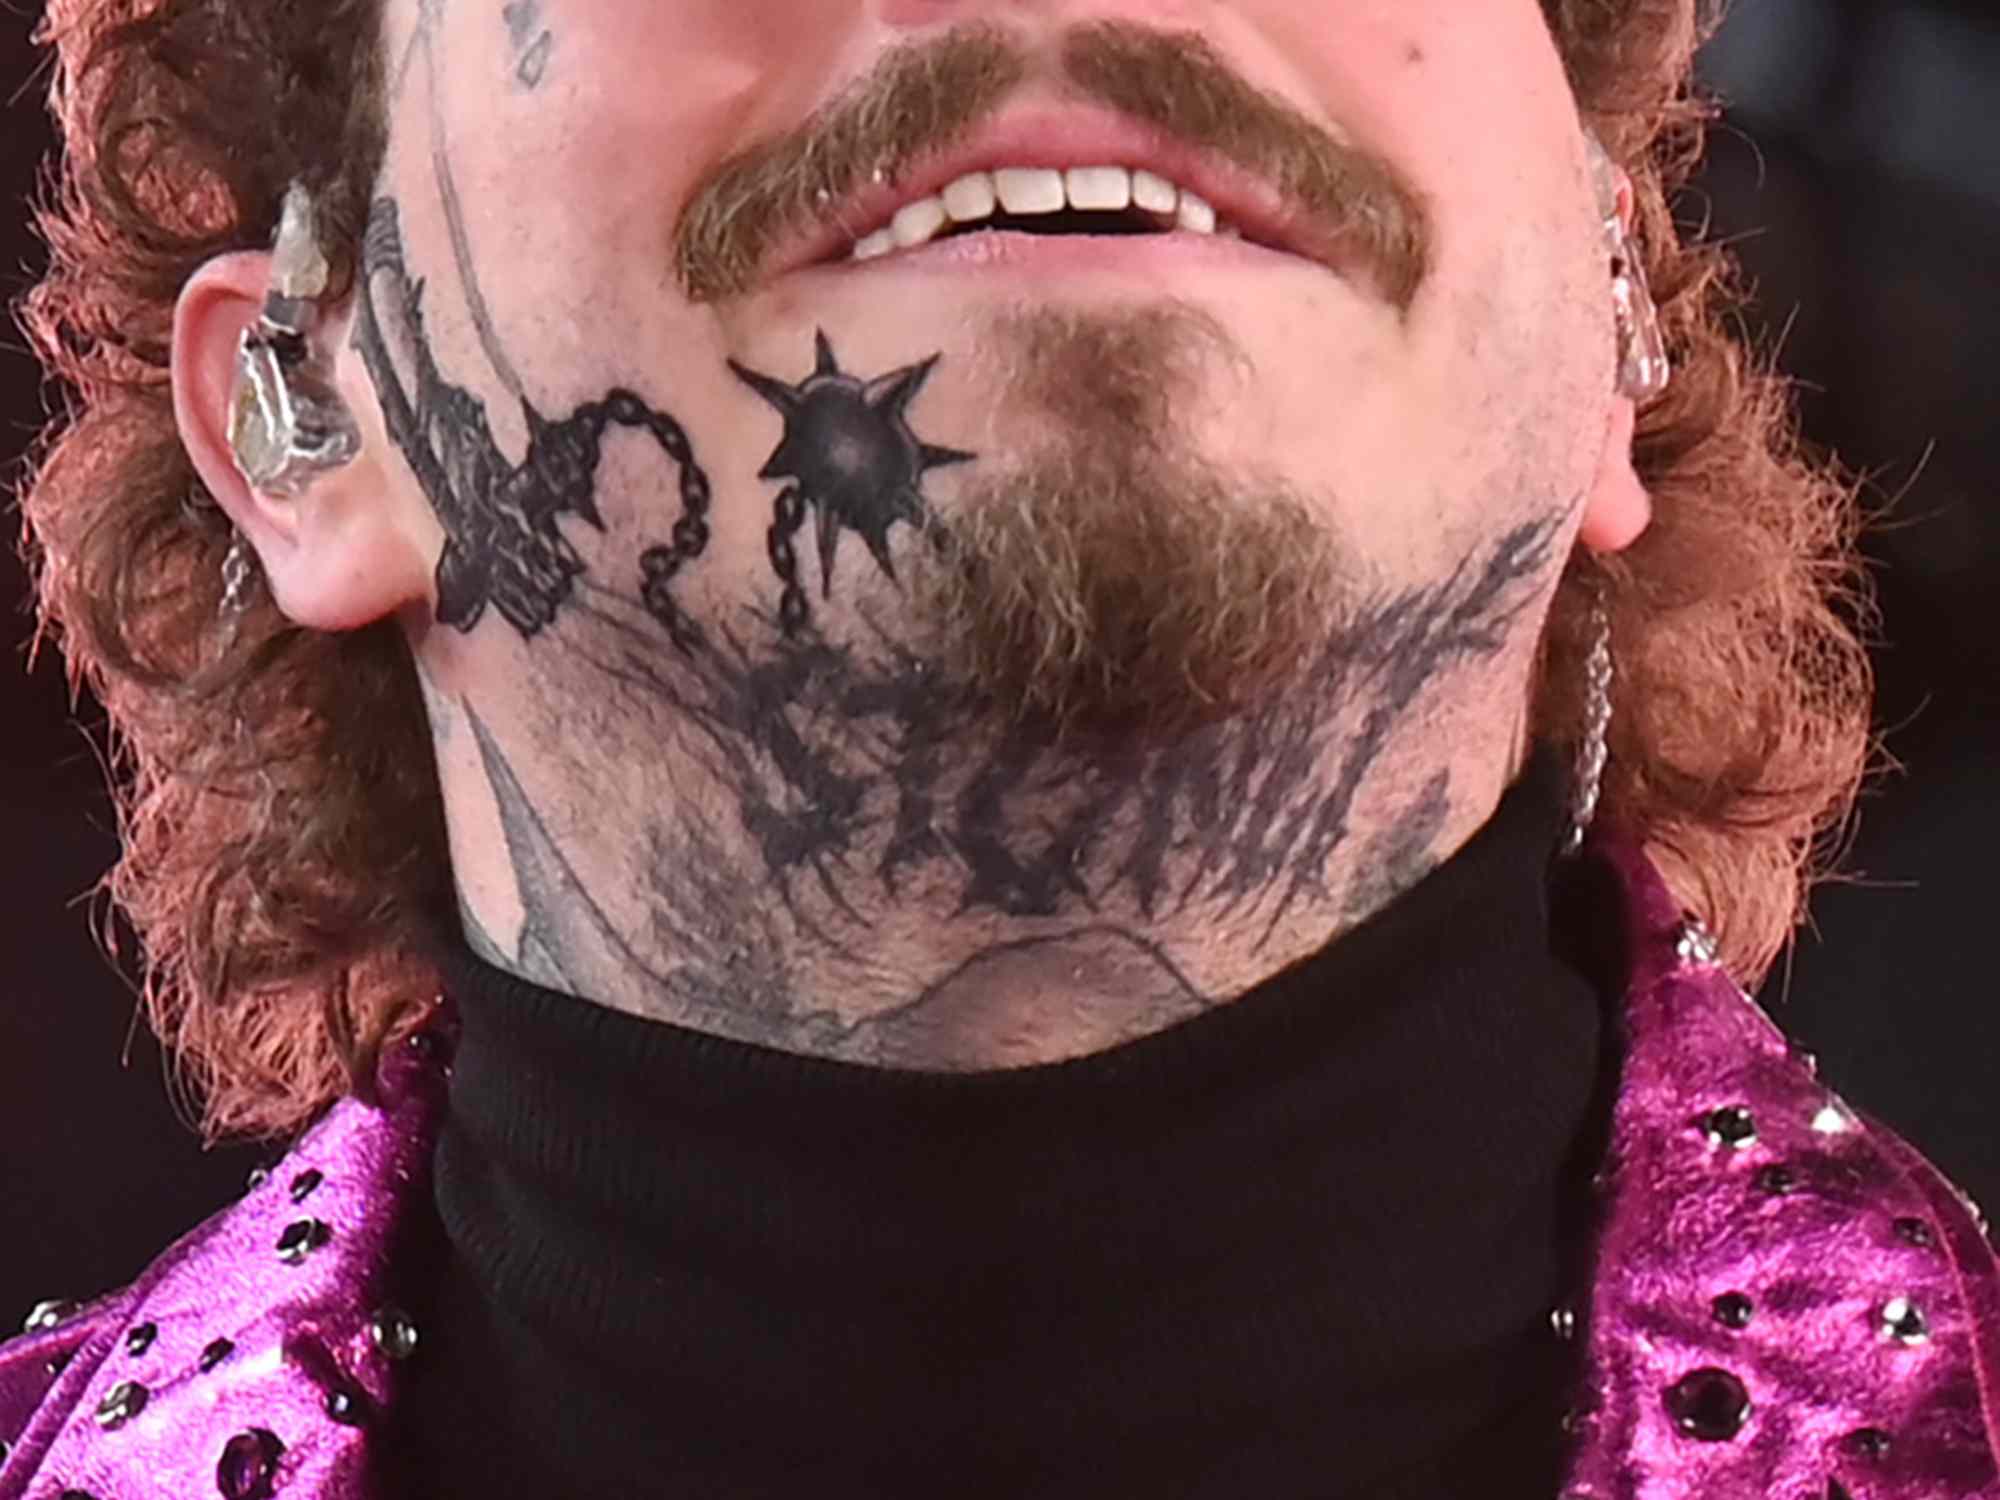 Post Malone (tattoo detail) performs during the Times Square New Year's Eve 2020 Celebration on December 31, 2019 in New York City.